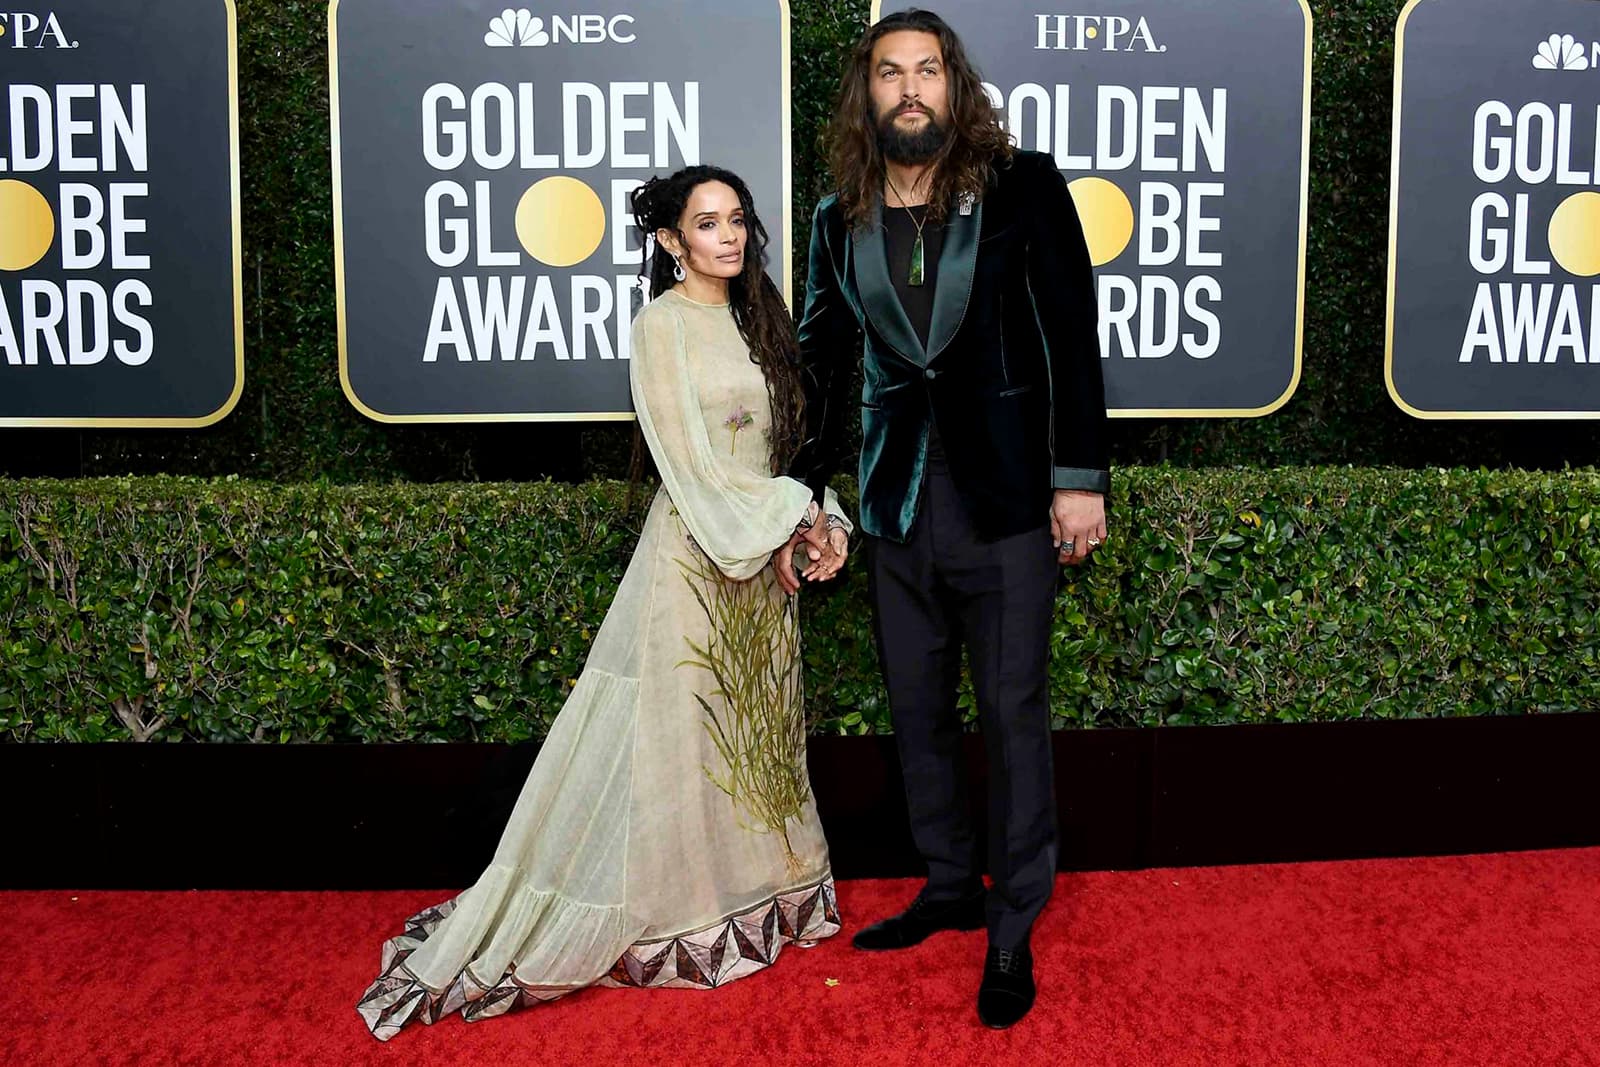 Lisa Bonet wearing Fernando Jorge chalcedony and diamond earrings, and her husband Jason Momoa wearing a Cartier Art Deco style brooch with onyx, emerald and diamonds in white gold, and 46mm Ballon Bleu de Cartier watch in rose gold, as well as his own jade pendant and rings